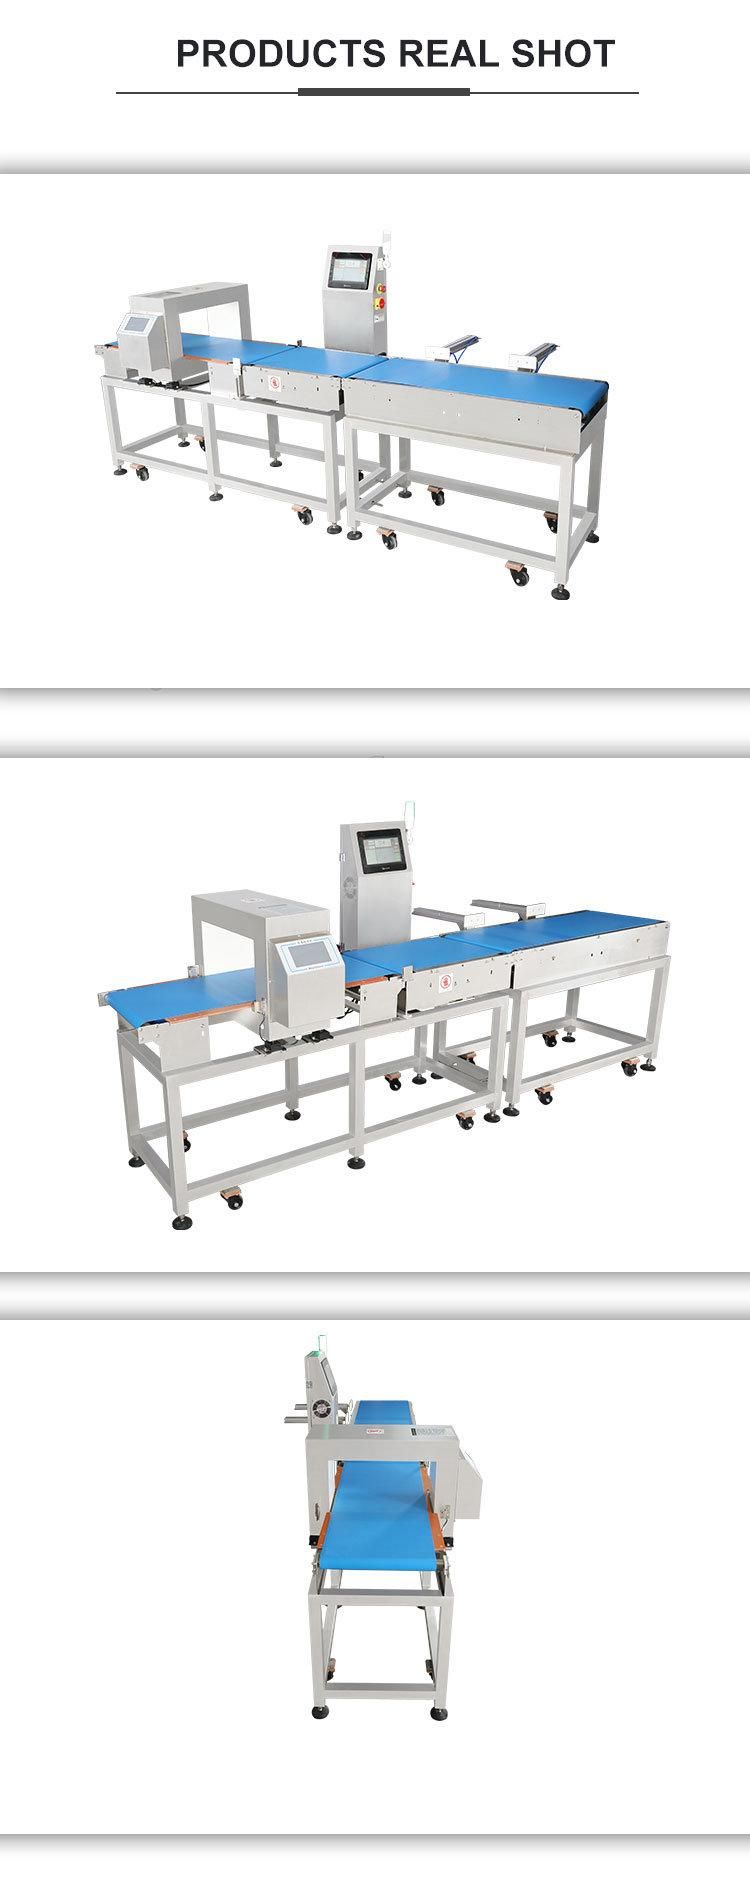 Combination System of Online Checkweigher and Metal Detector for Production Line in Food Industry with Counting Function